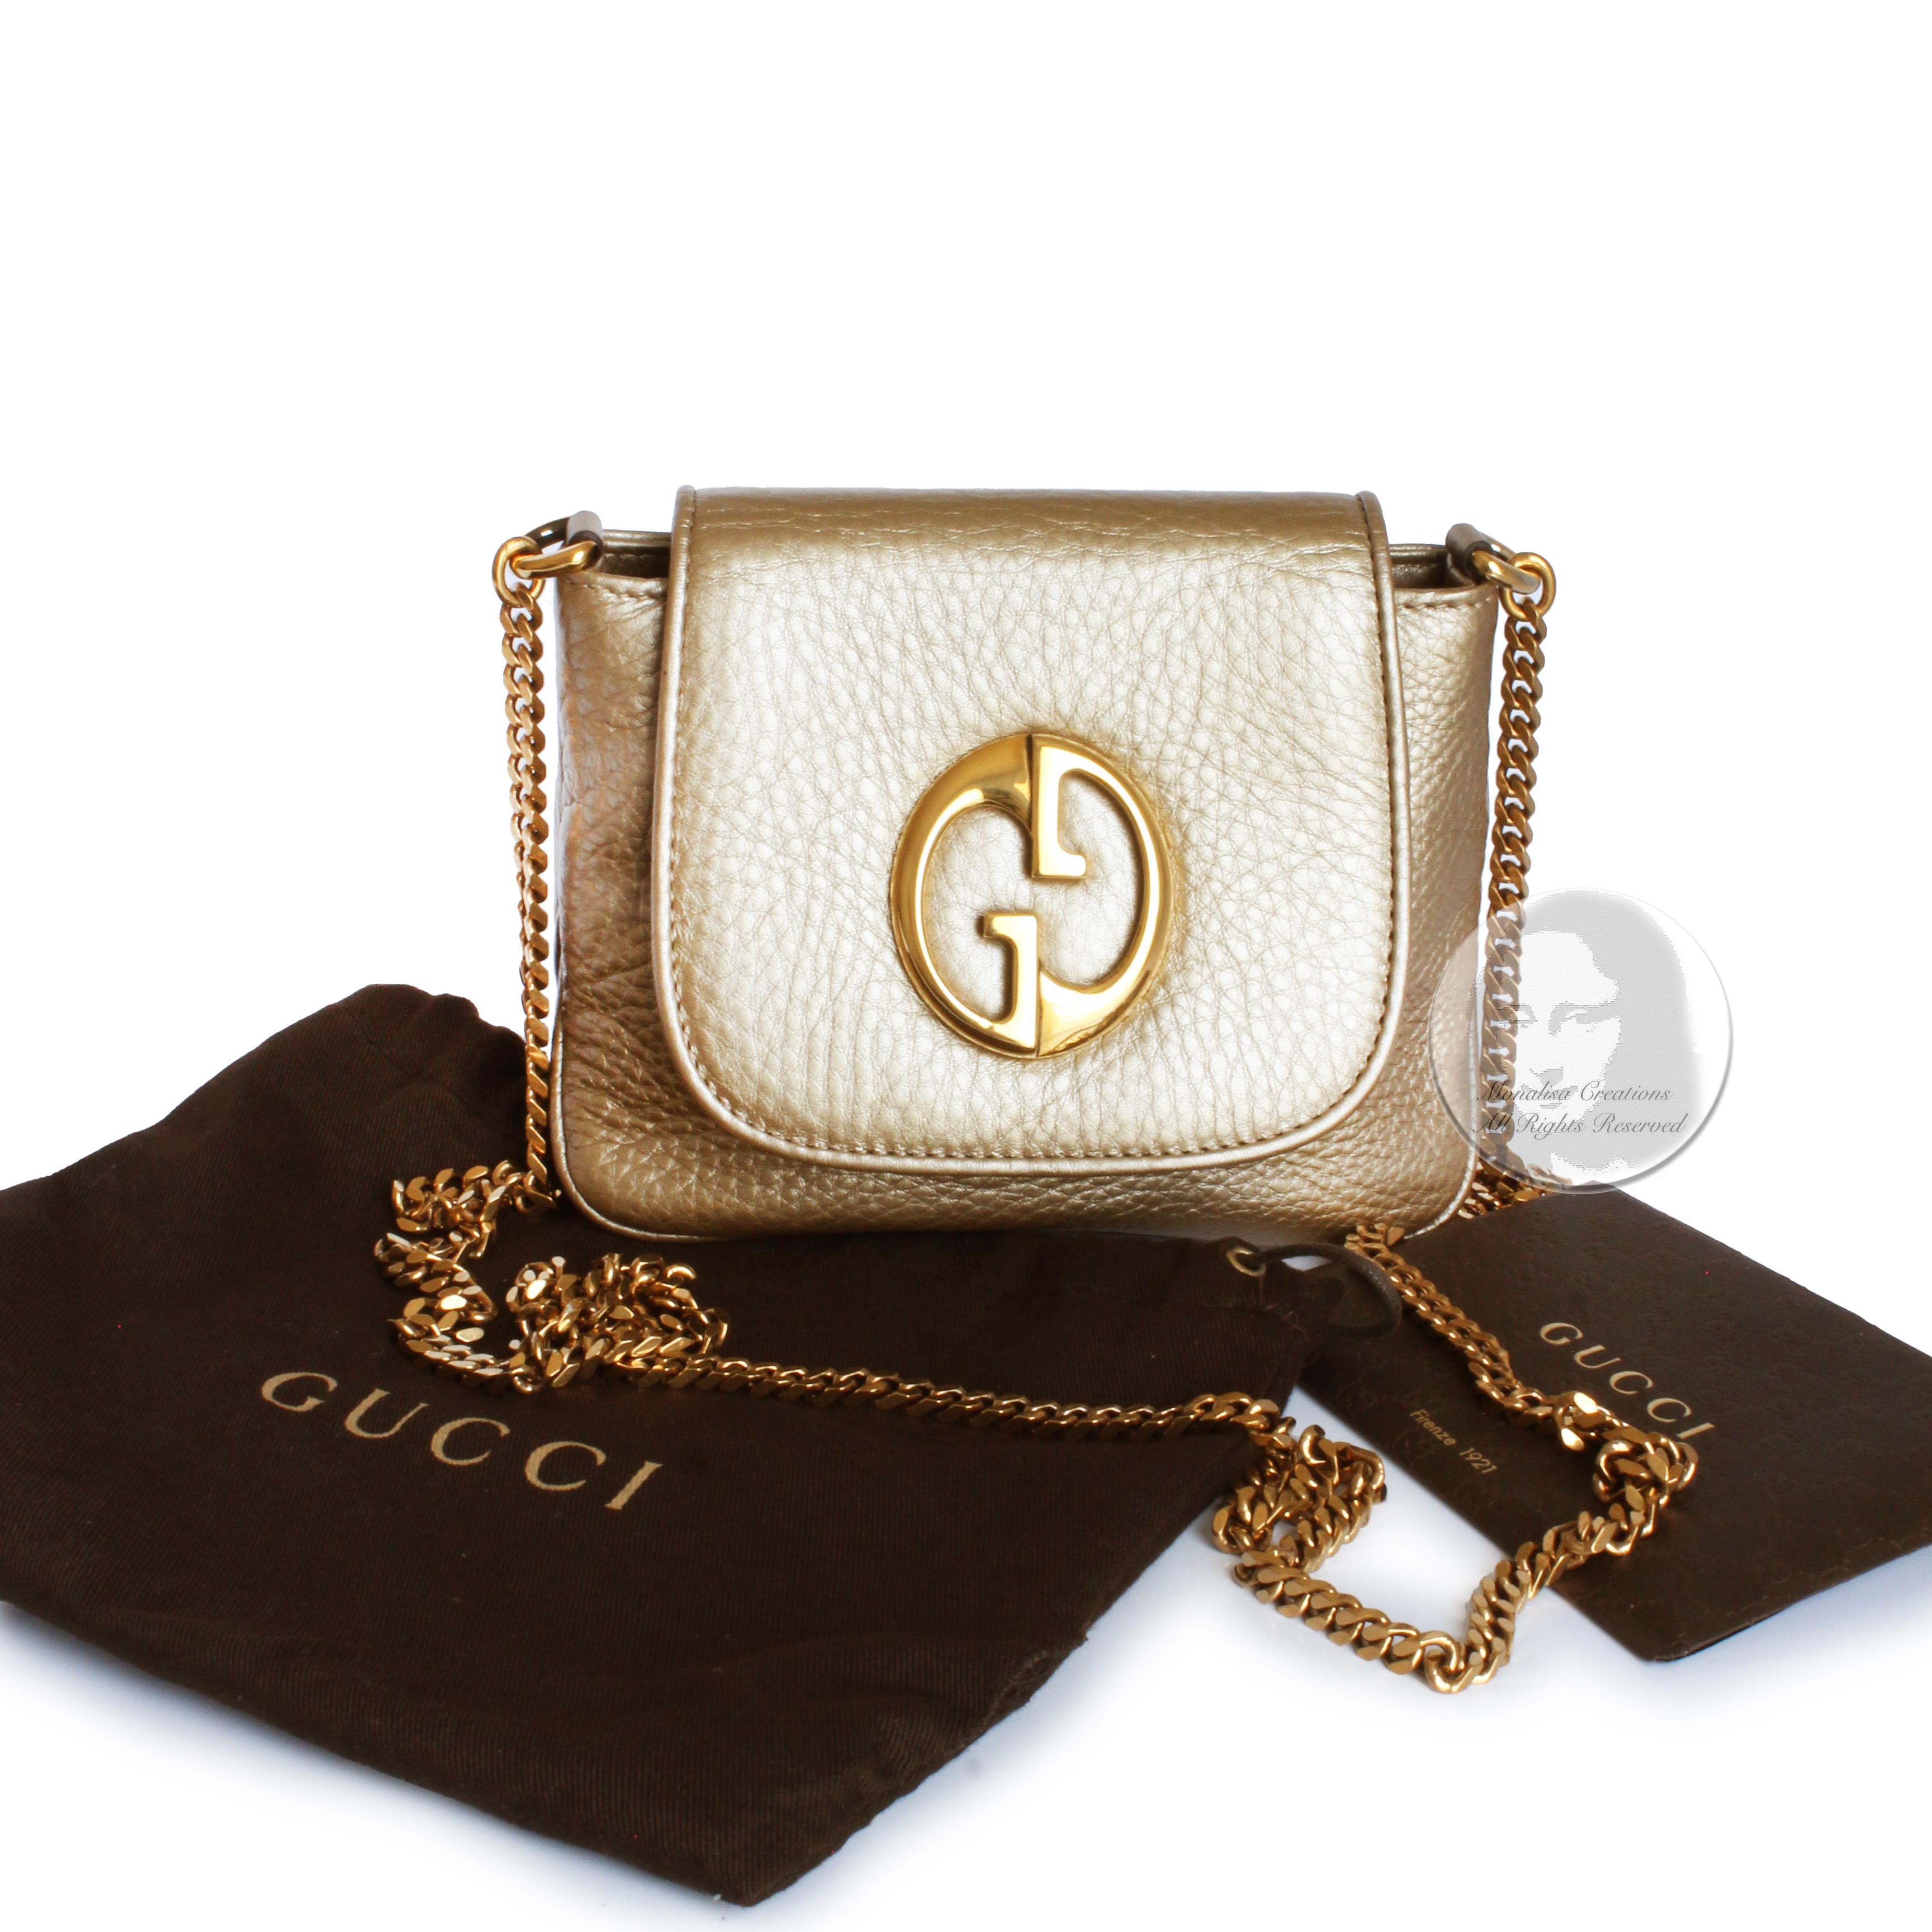 Authentic, New without Tag (NWOT) Gucci 1973 Shoulder Bag or Cross Body, released in 2012. Made from gold pebbled leather, it features the Gucci 1973 logo in gold on the top flap and has a gold metal chain strap. Lined in sueded fabric with one slip